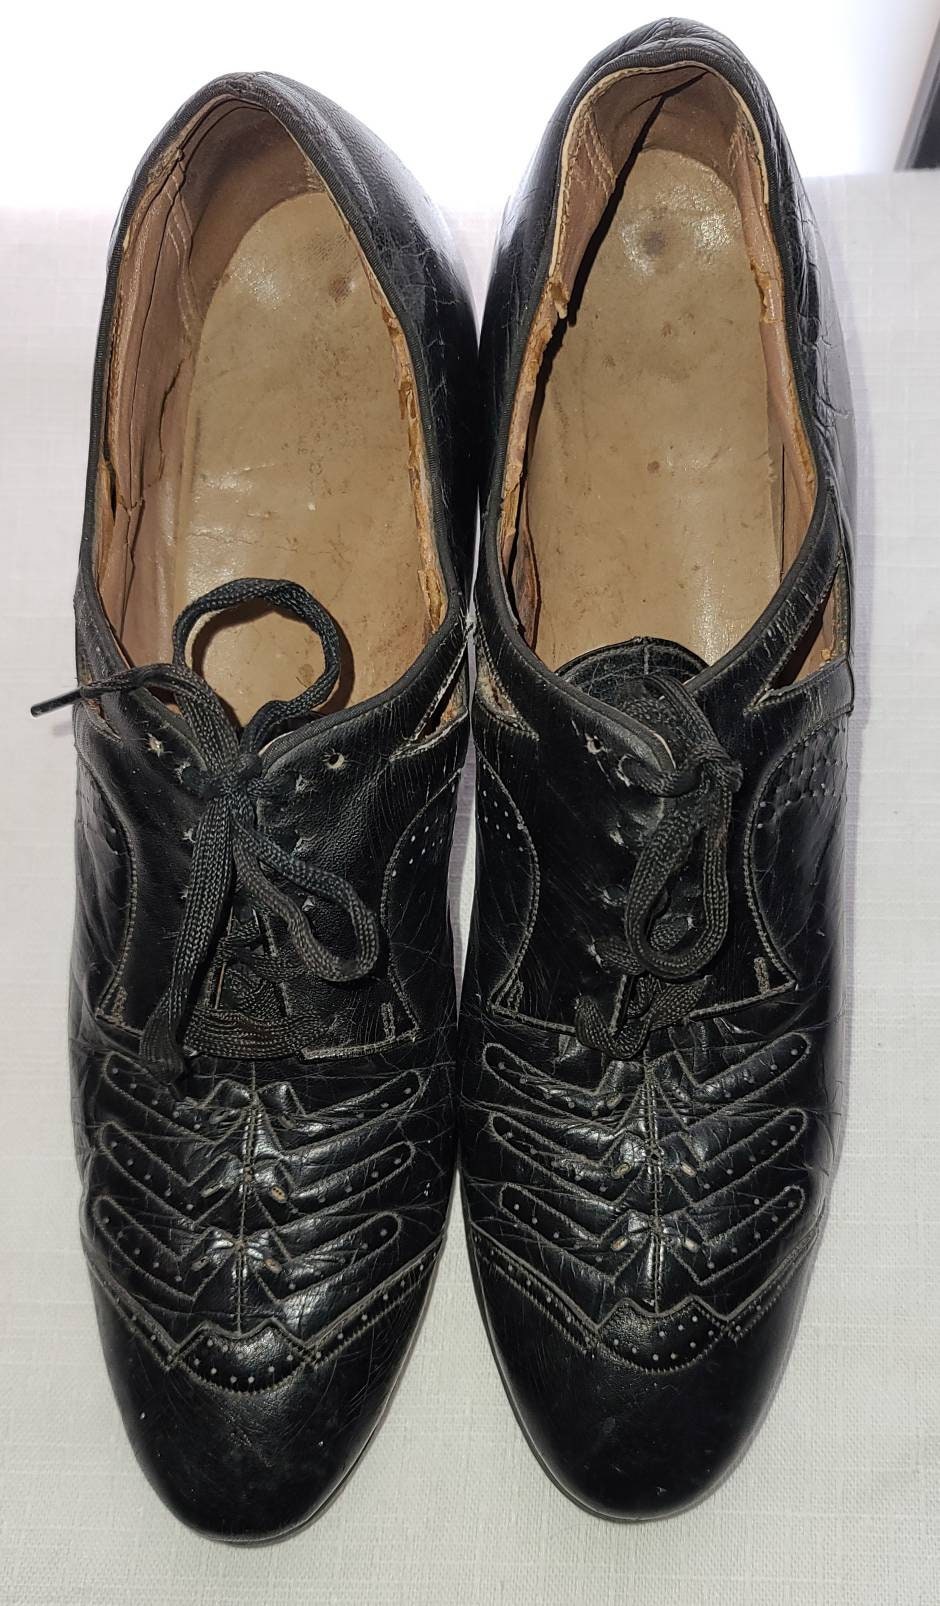 Vintage 1920s 30s Shoes Black Perforated Oxford Lace Up Shoes Cutouts at Sides Art Deco Arts and Crafts a few condition issues